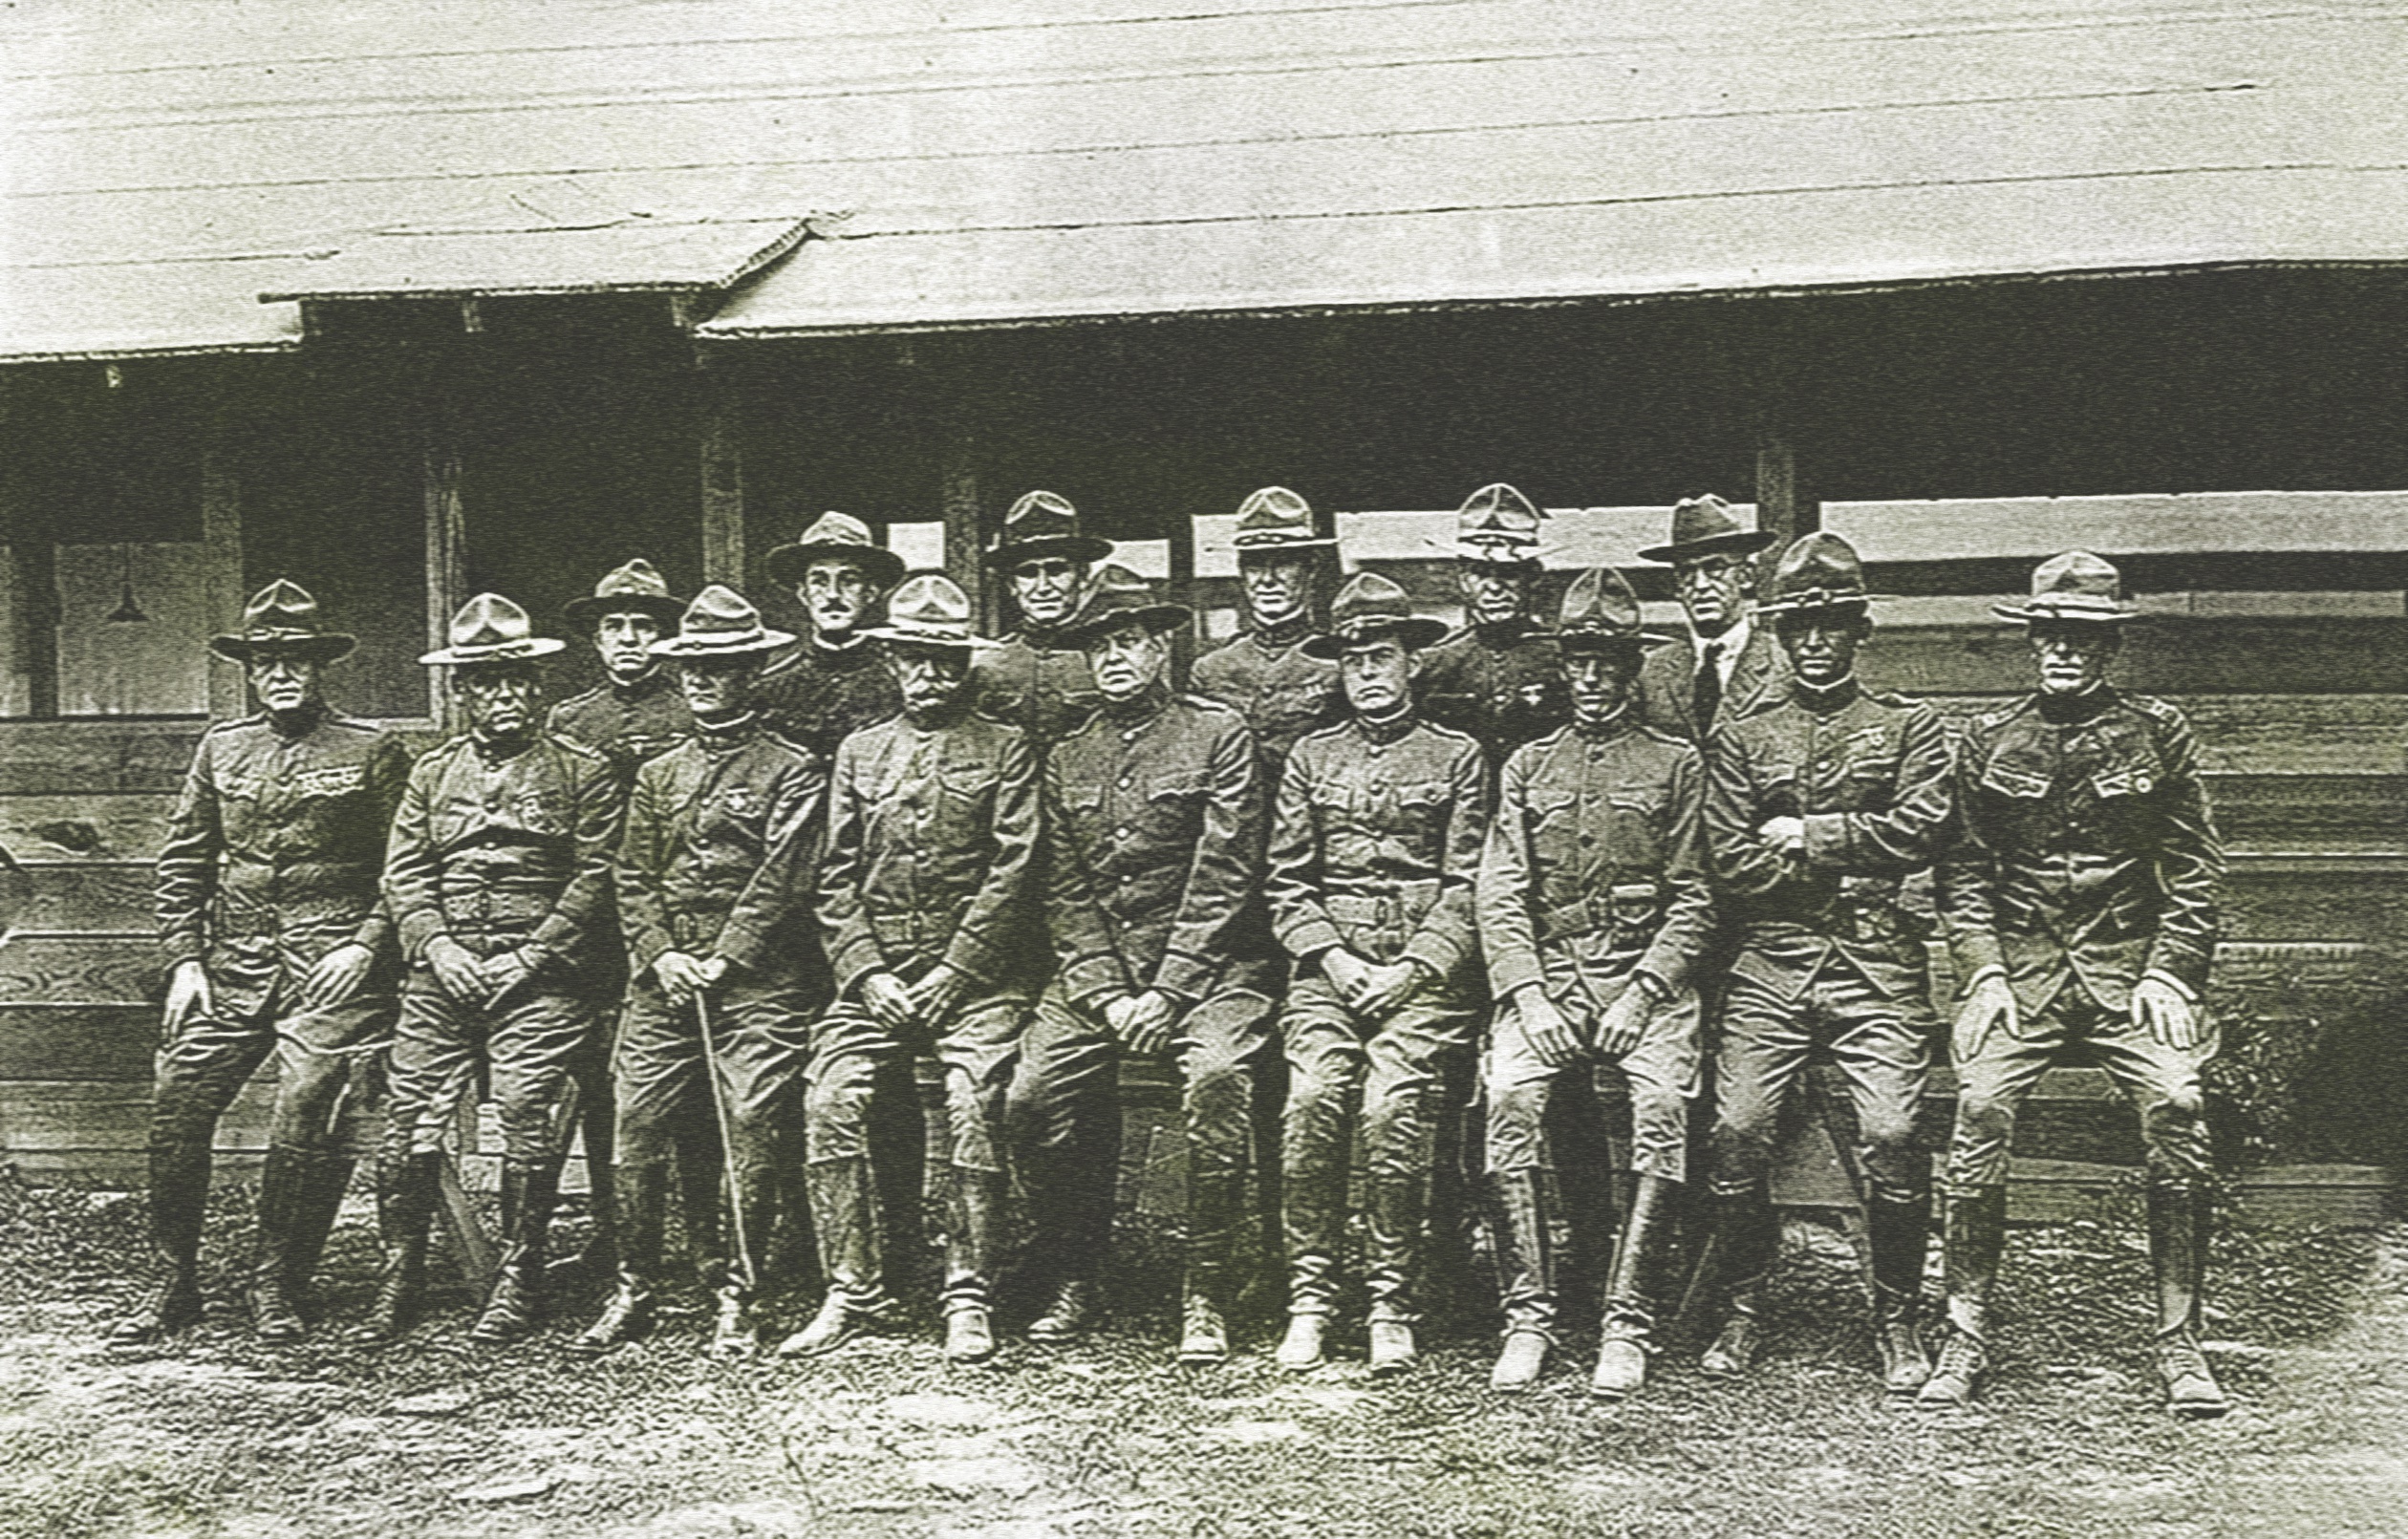 On November 30, 1917, the officers of the first court-martial, shown here, announced their findings: five acquittals and 58 convictions. It was the largest such proceeding in the history of the U.S. Army. (Houston Metropolitan Research Center, Houston Public Library)